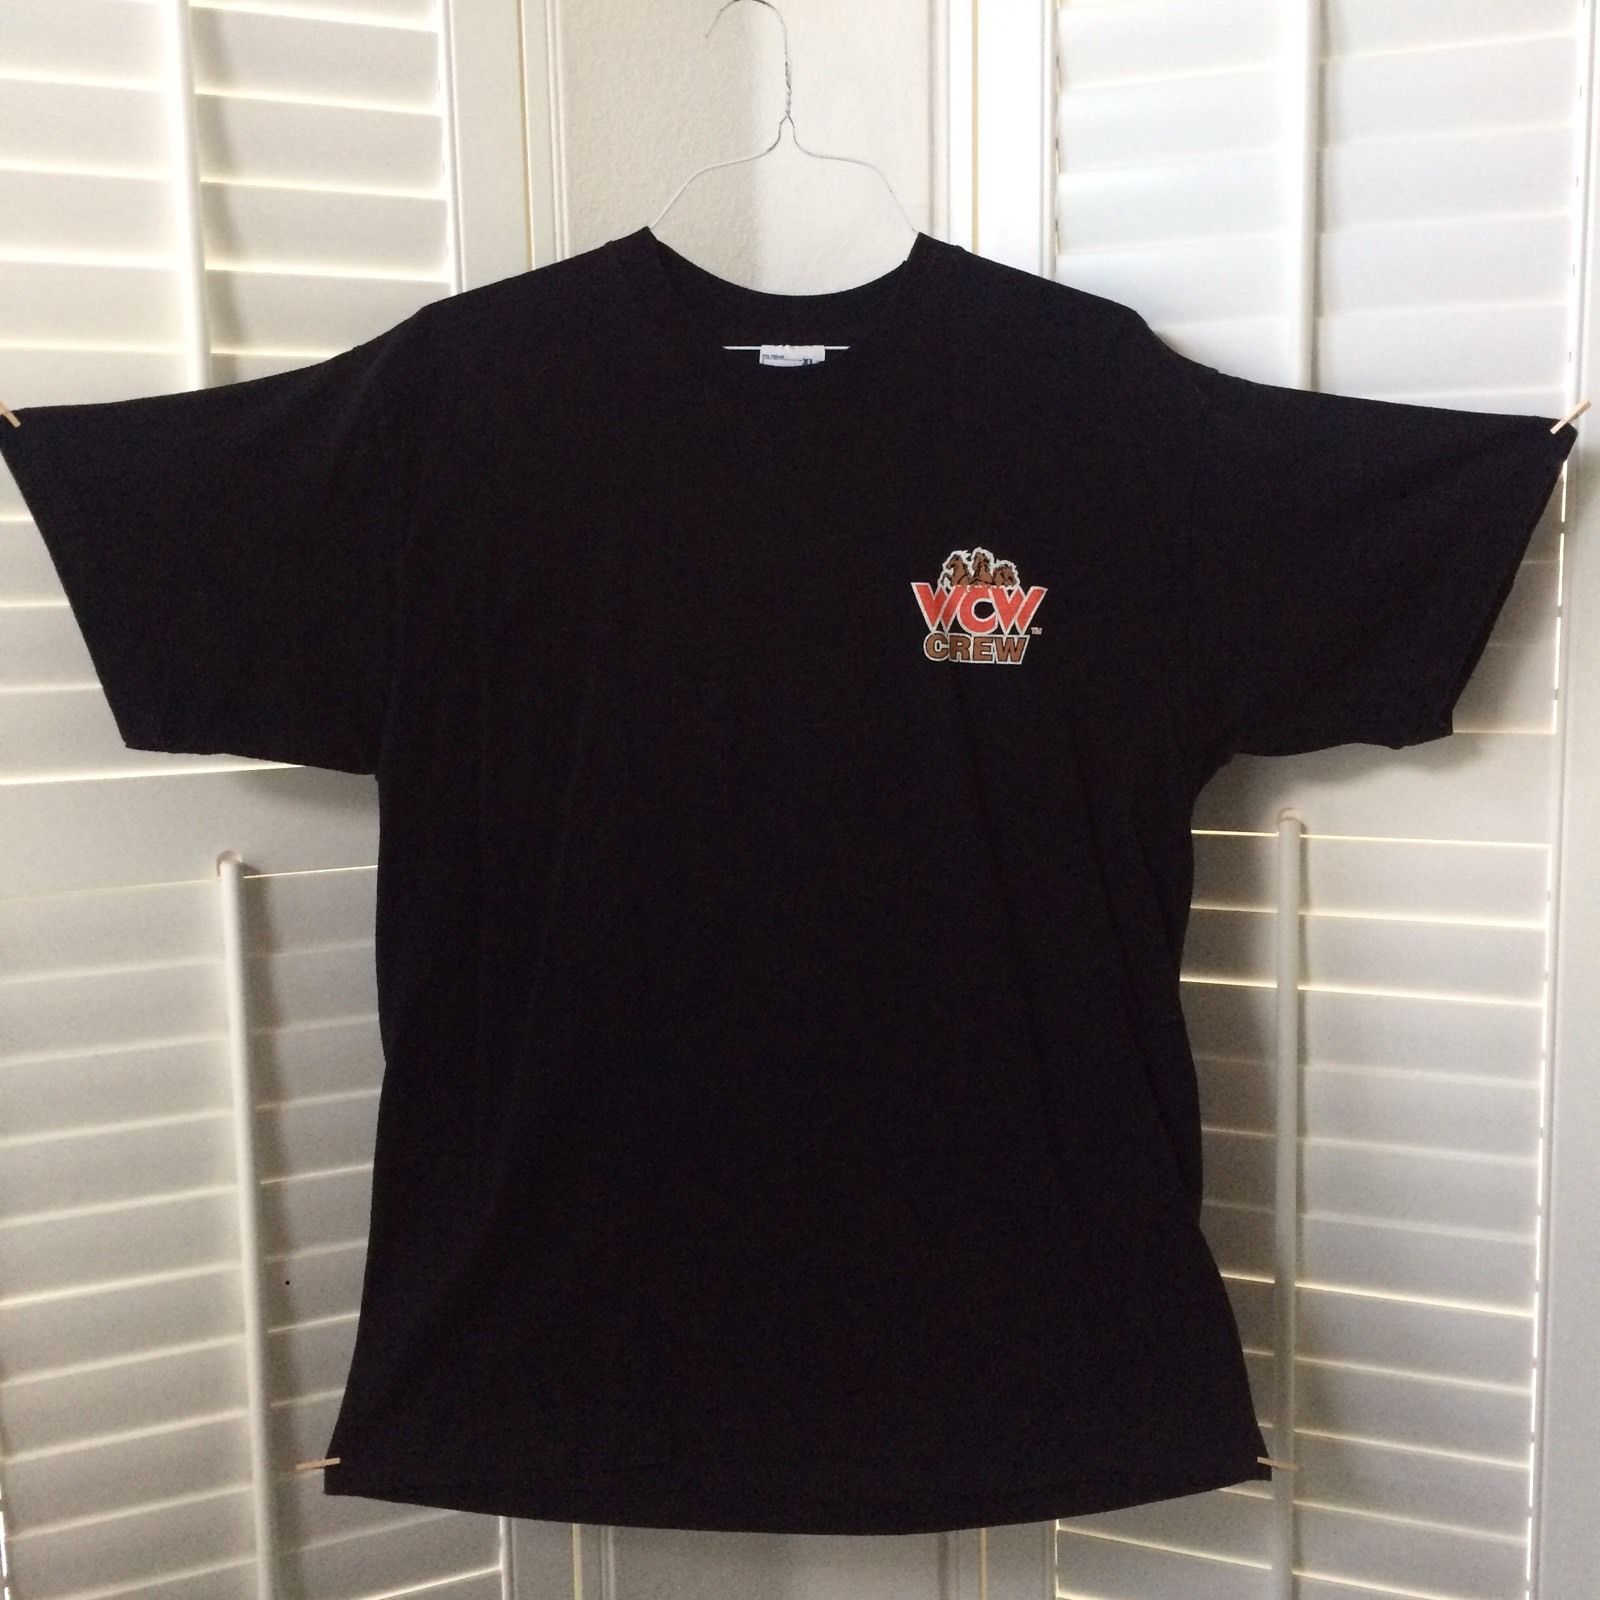 WCW eBay Find of the Day: Crap-Ton of WCW Crew Shirts! - WCW Worldwide